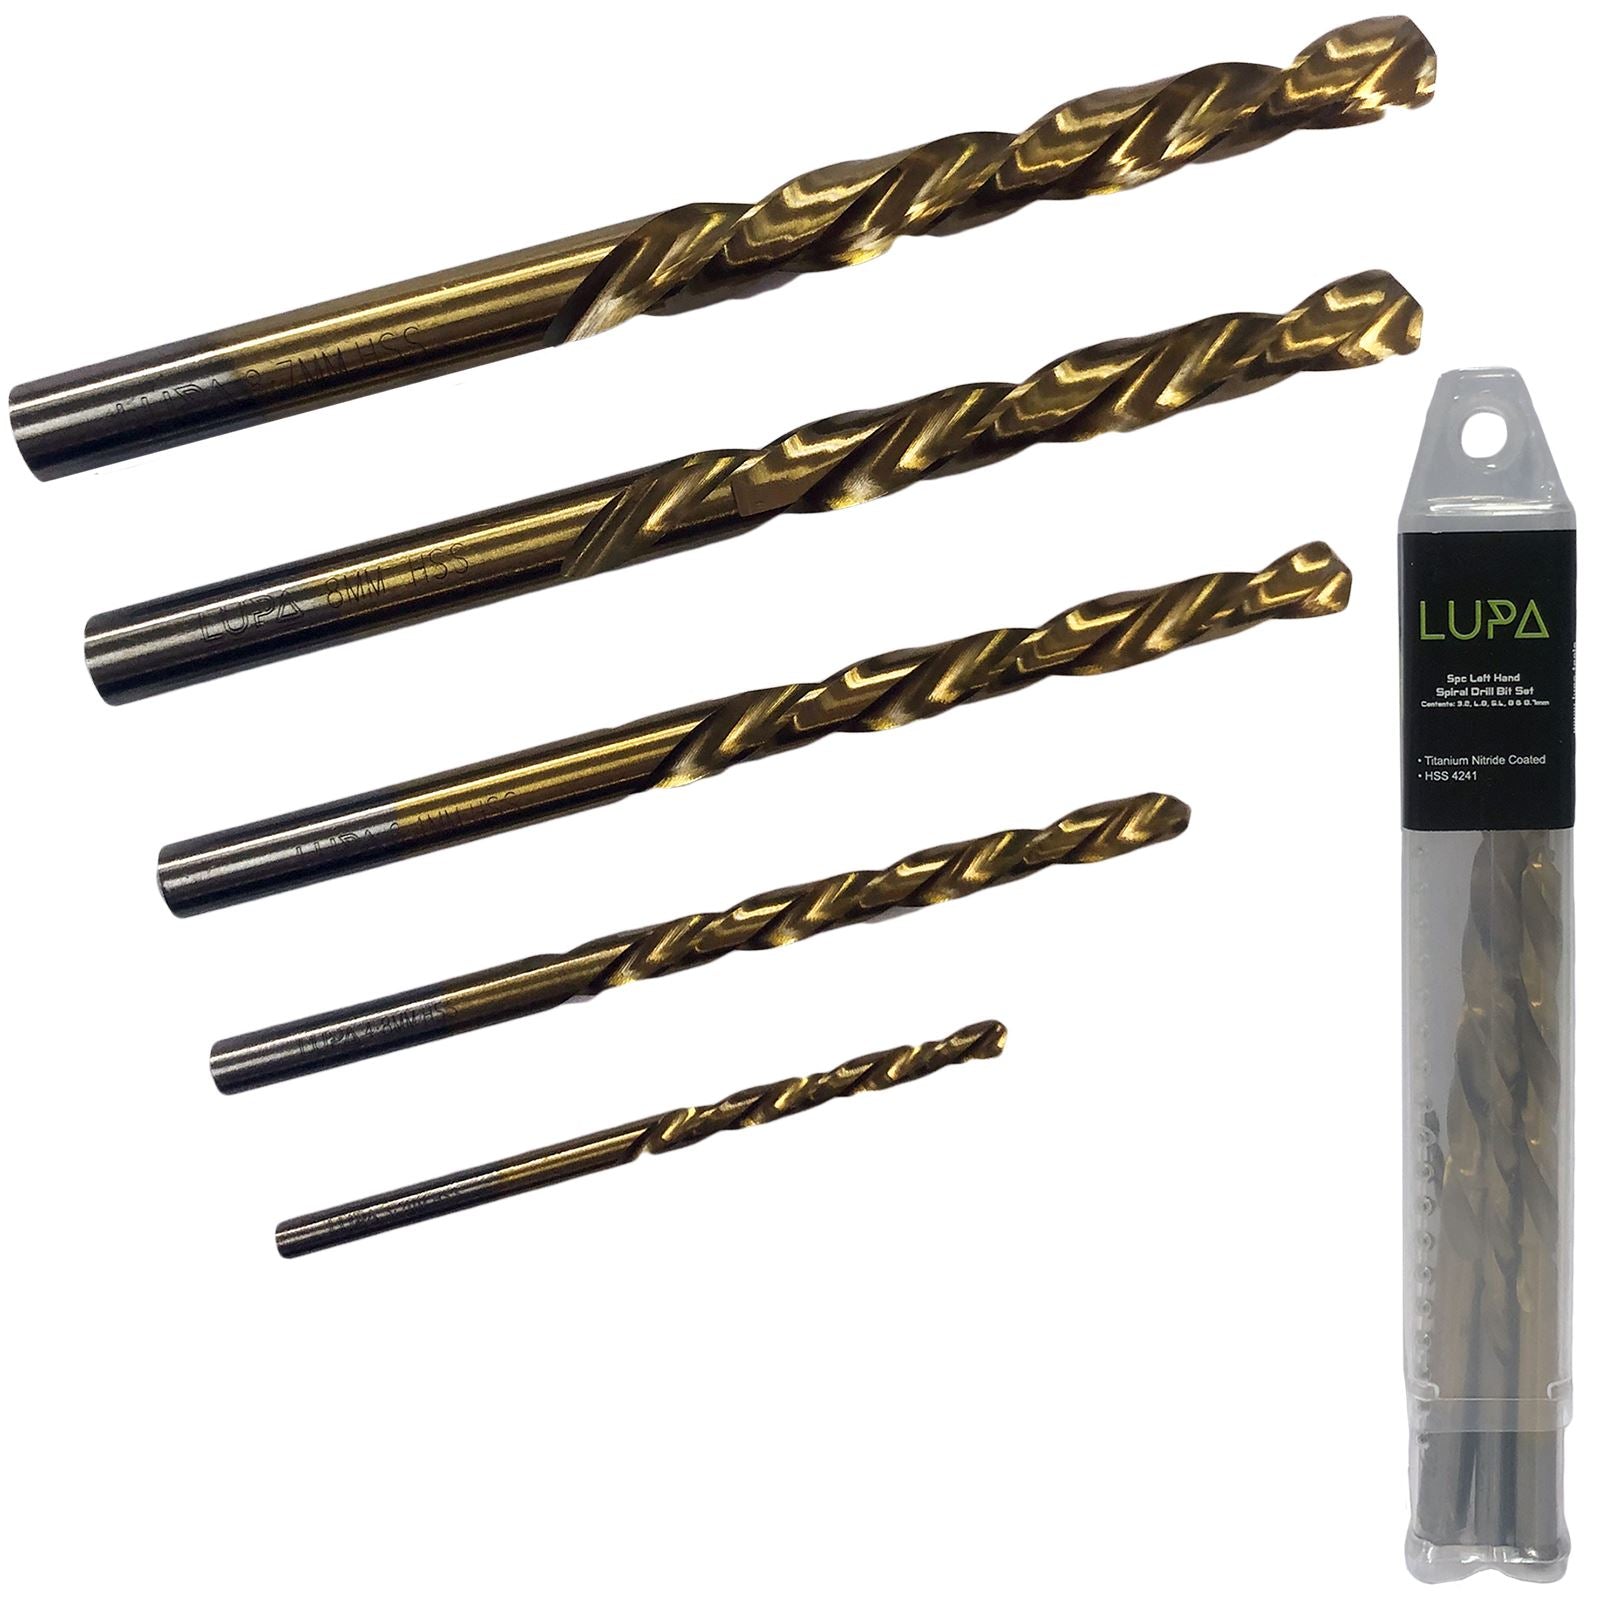 LUPA 5 Piece Left Hand Spiral Drill Bit Set Screw Stud Extraction Remover Removal